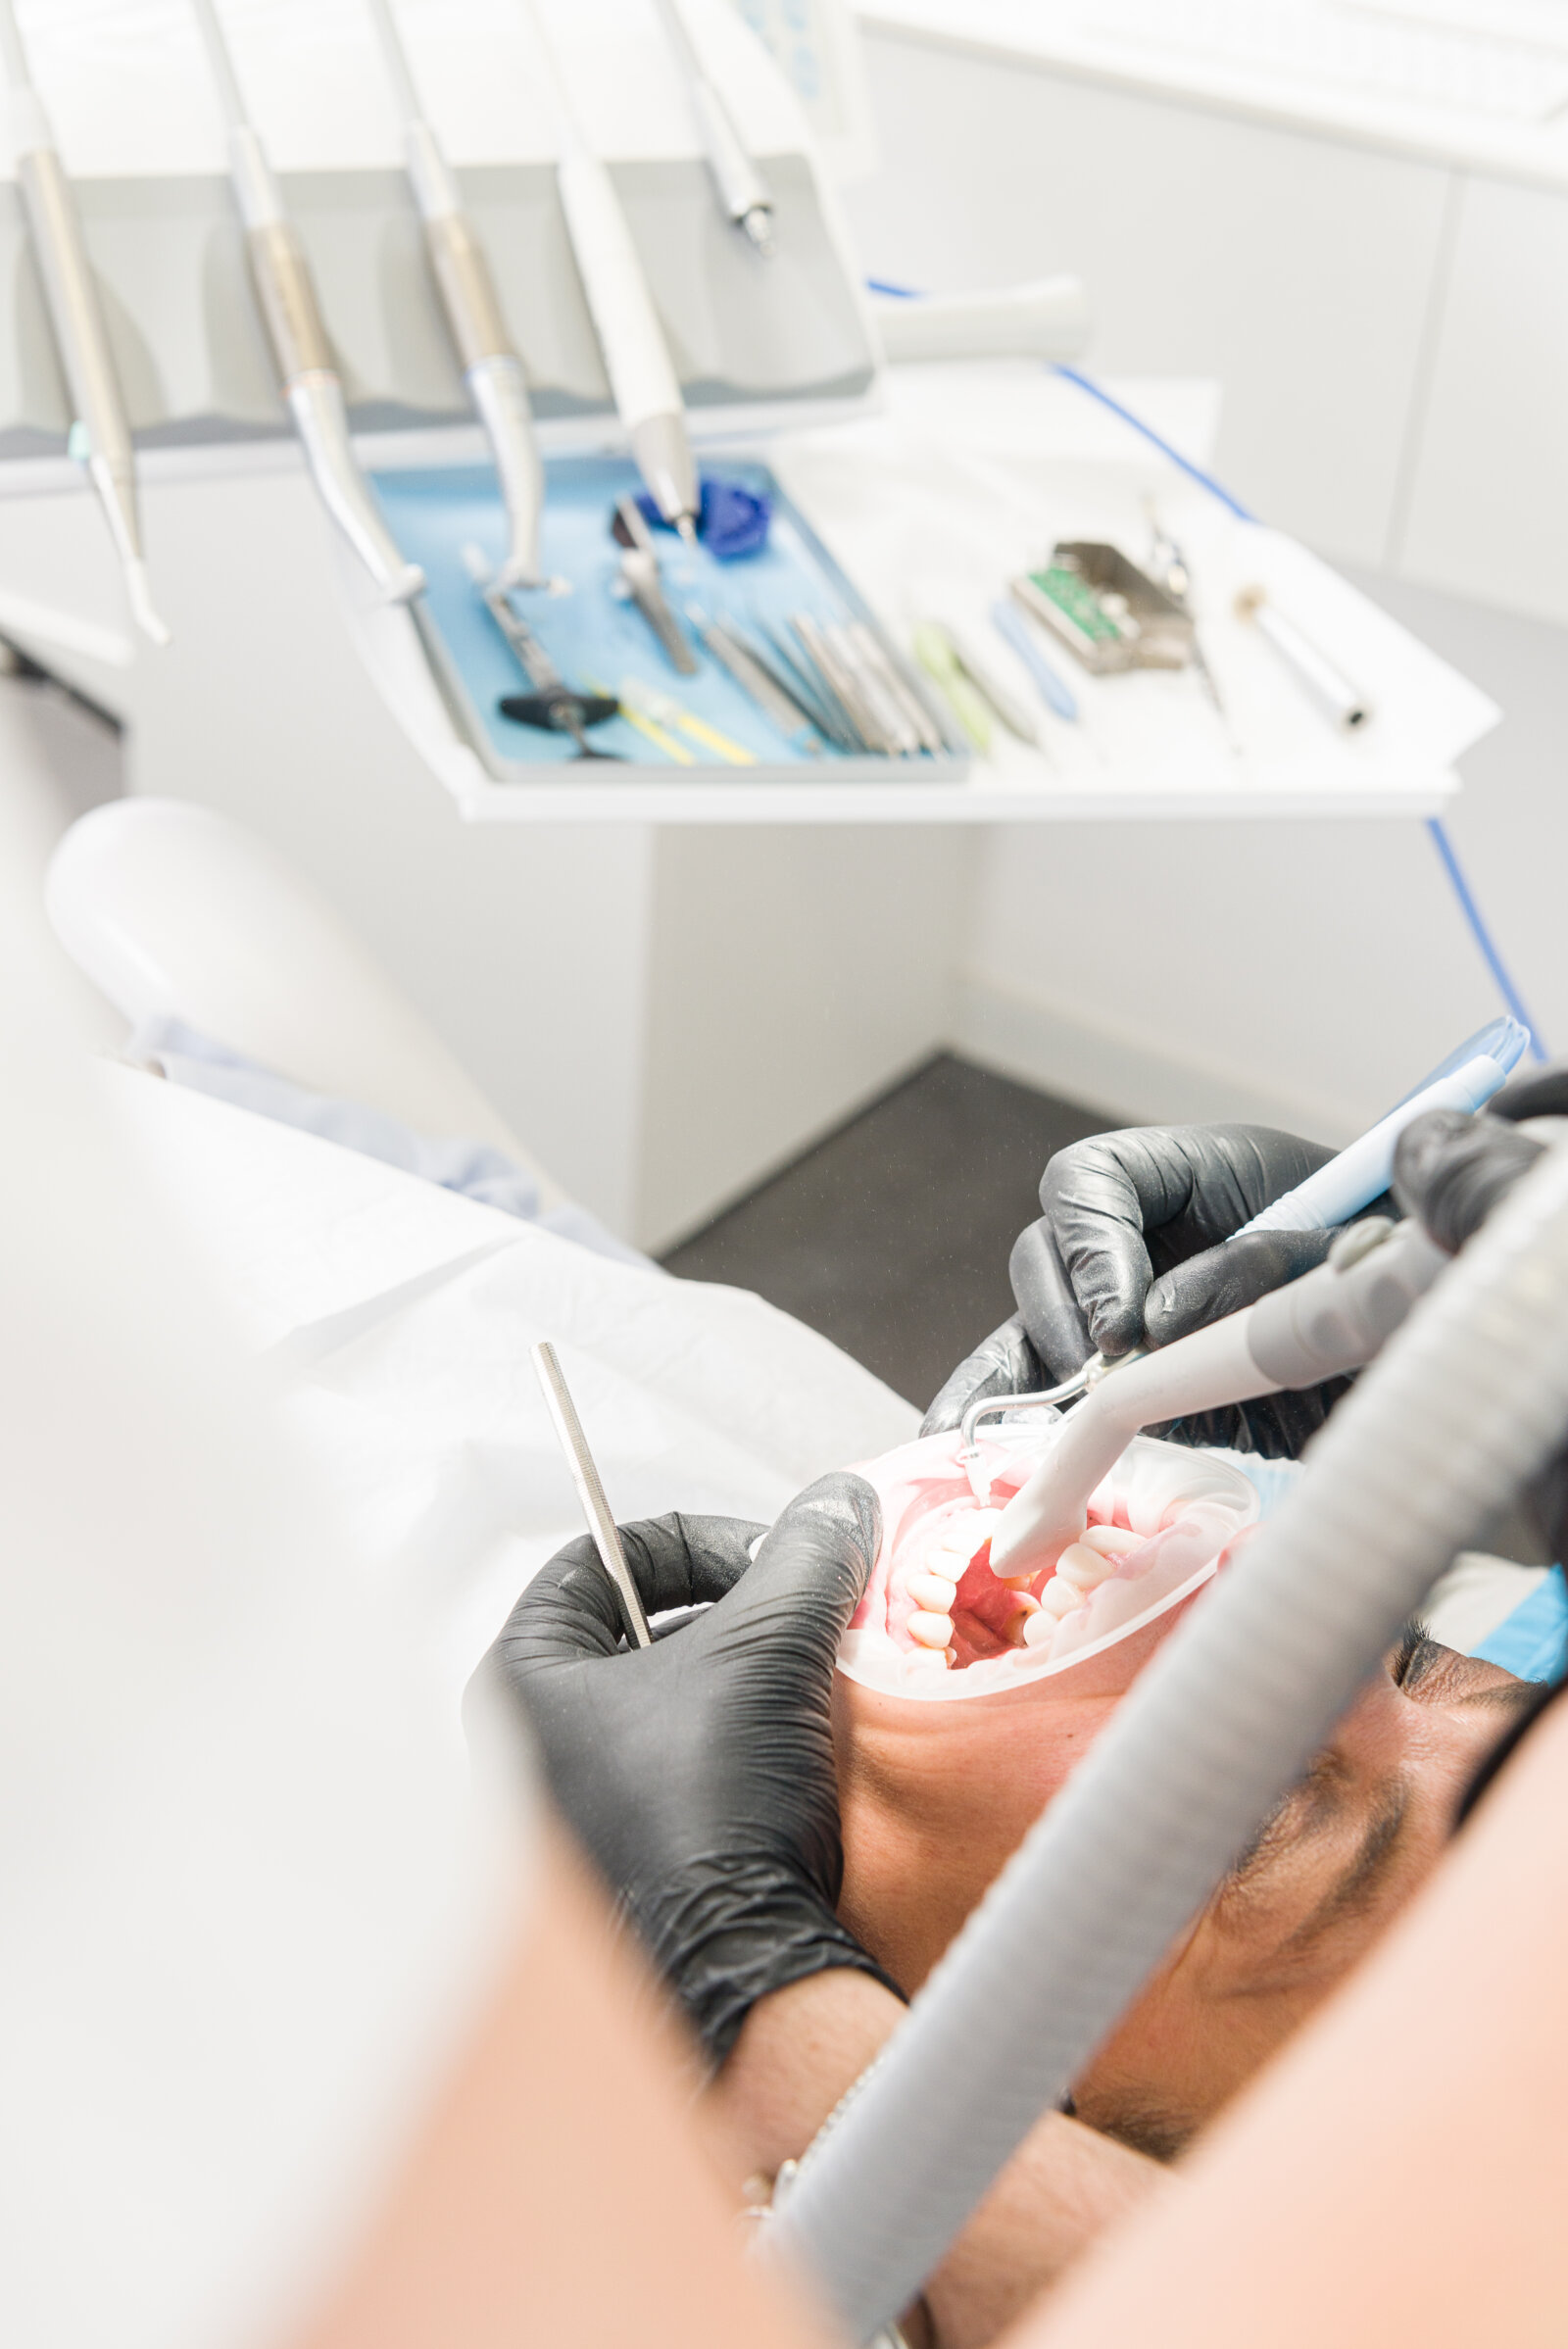 Why is periodontology important?